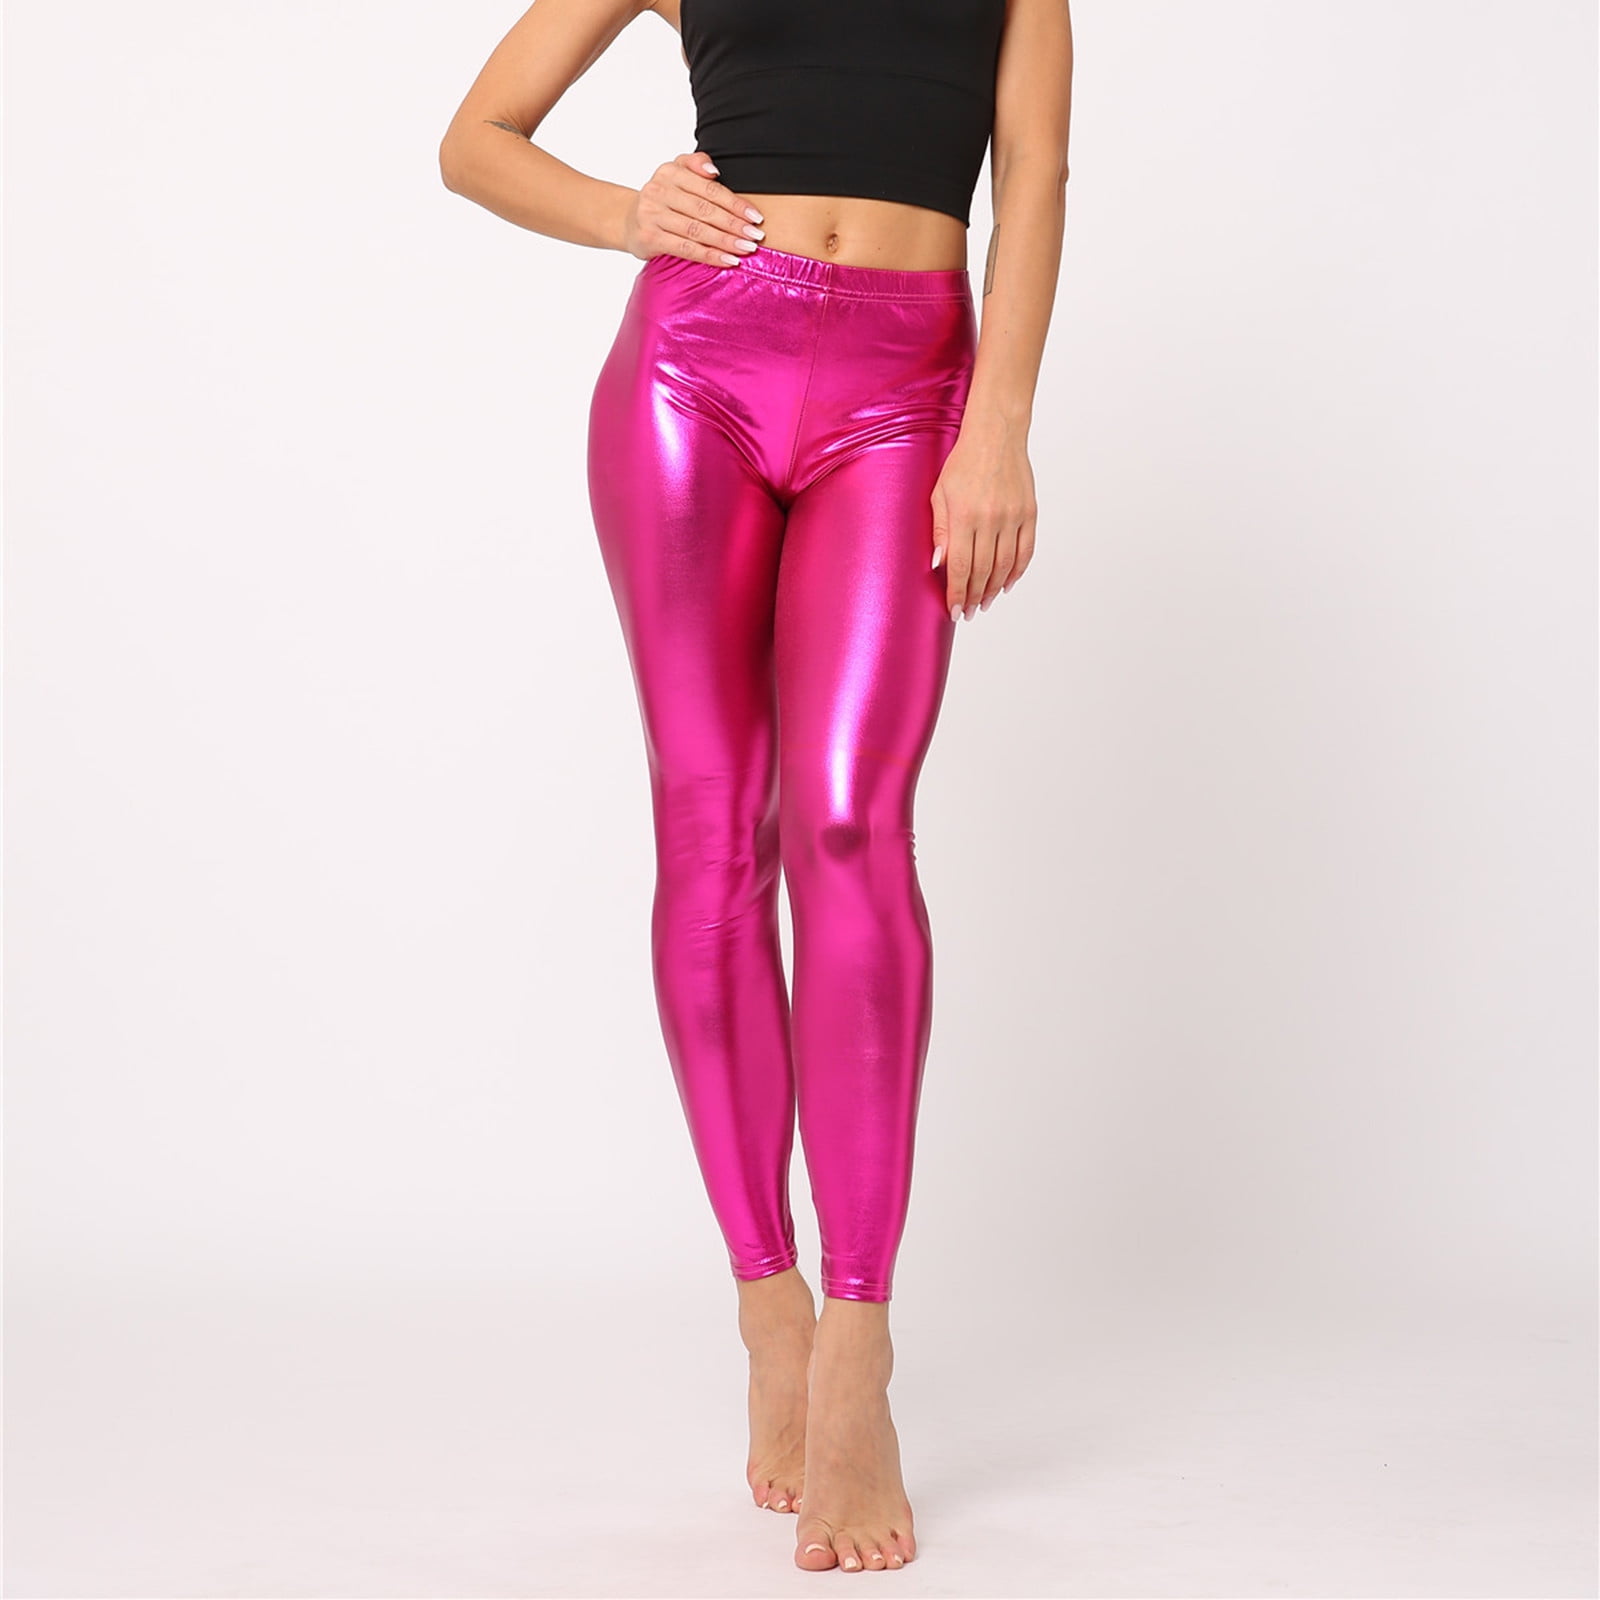 Be Fit Shiny Pink Scrunch Butt Legging - Be Fit Apparel